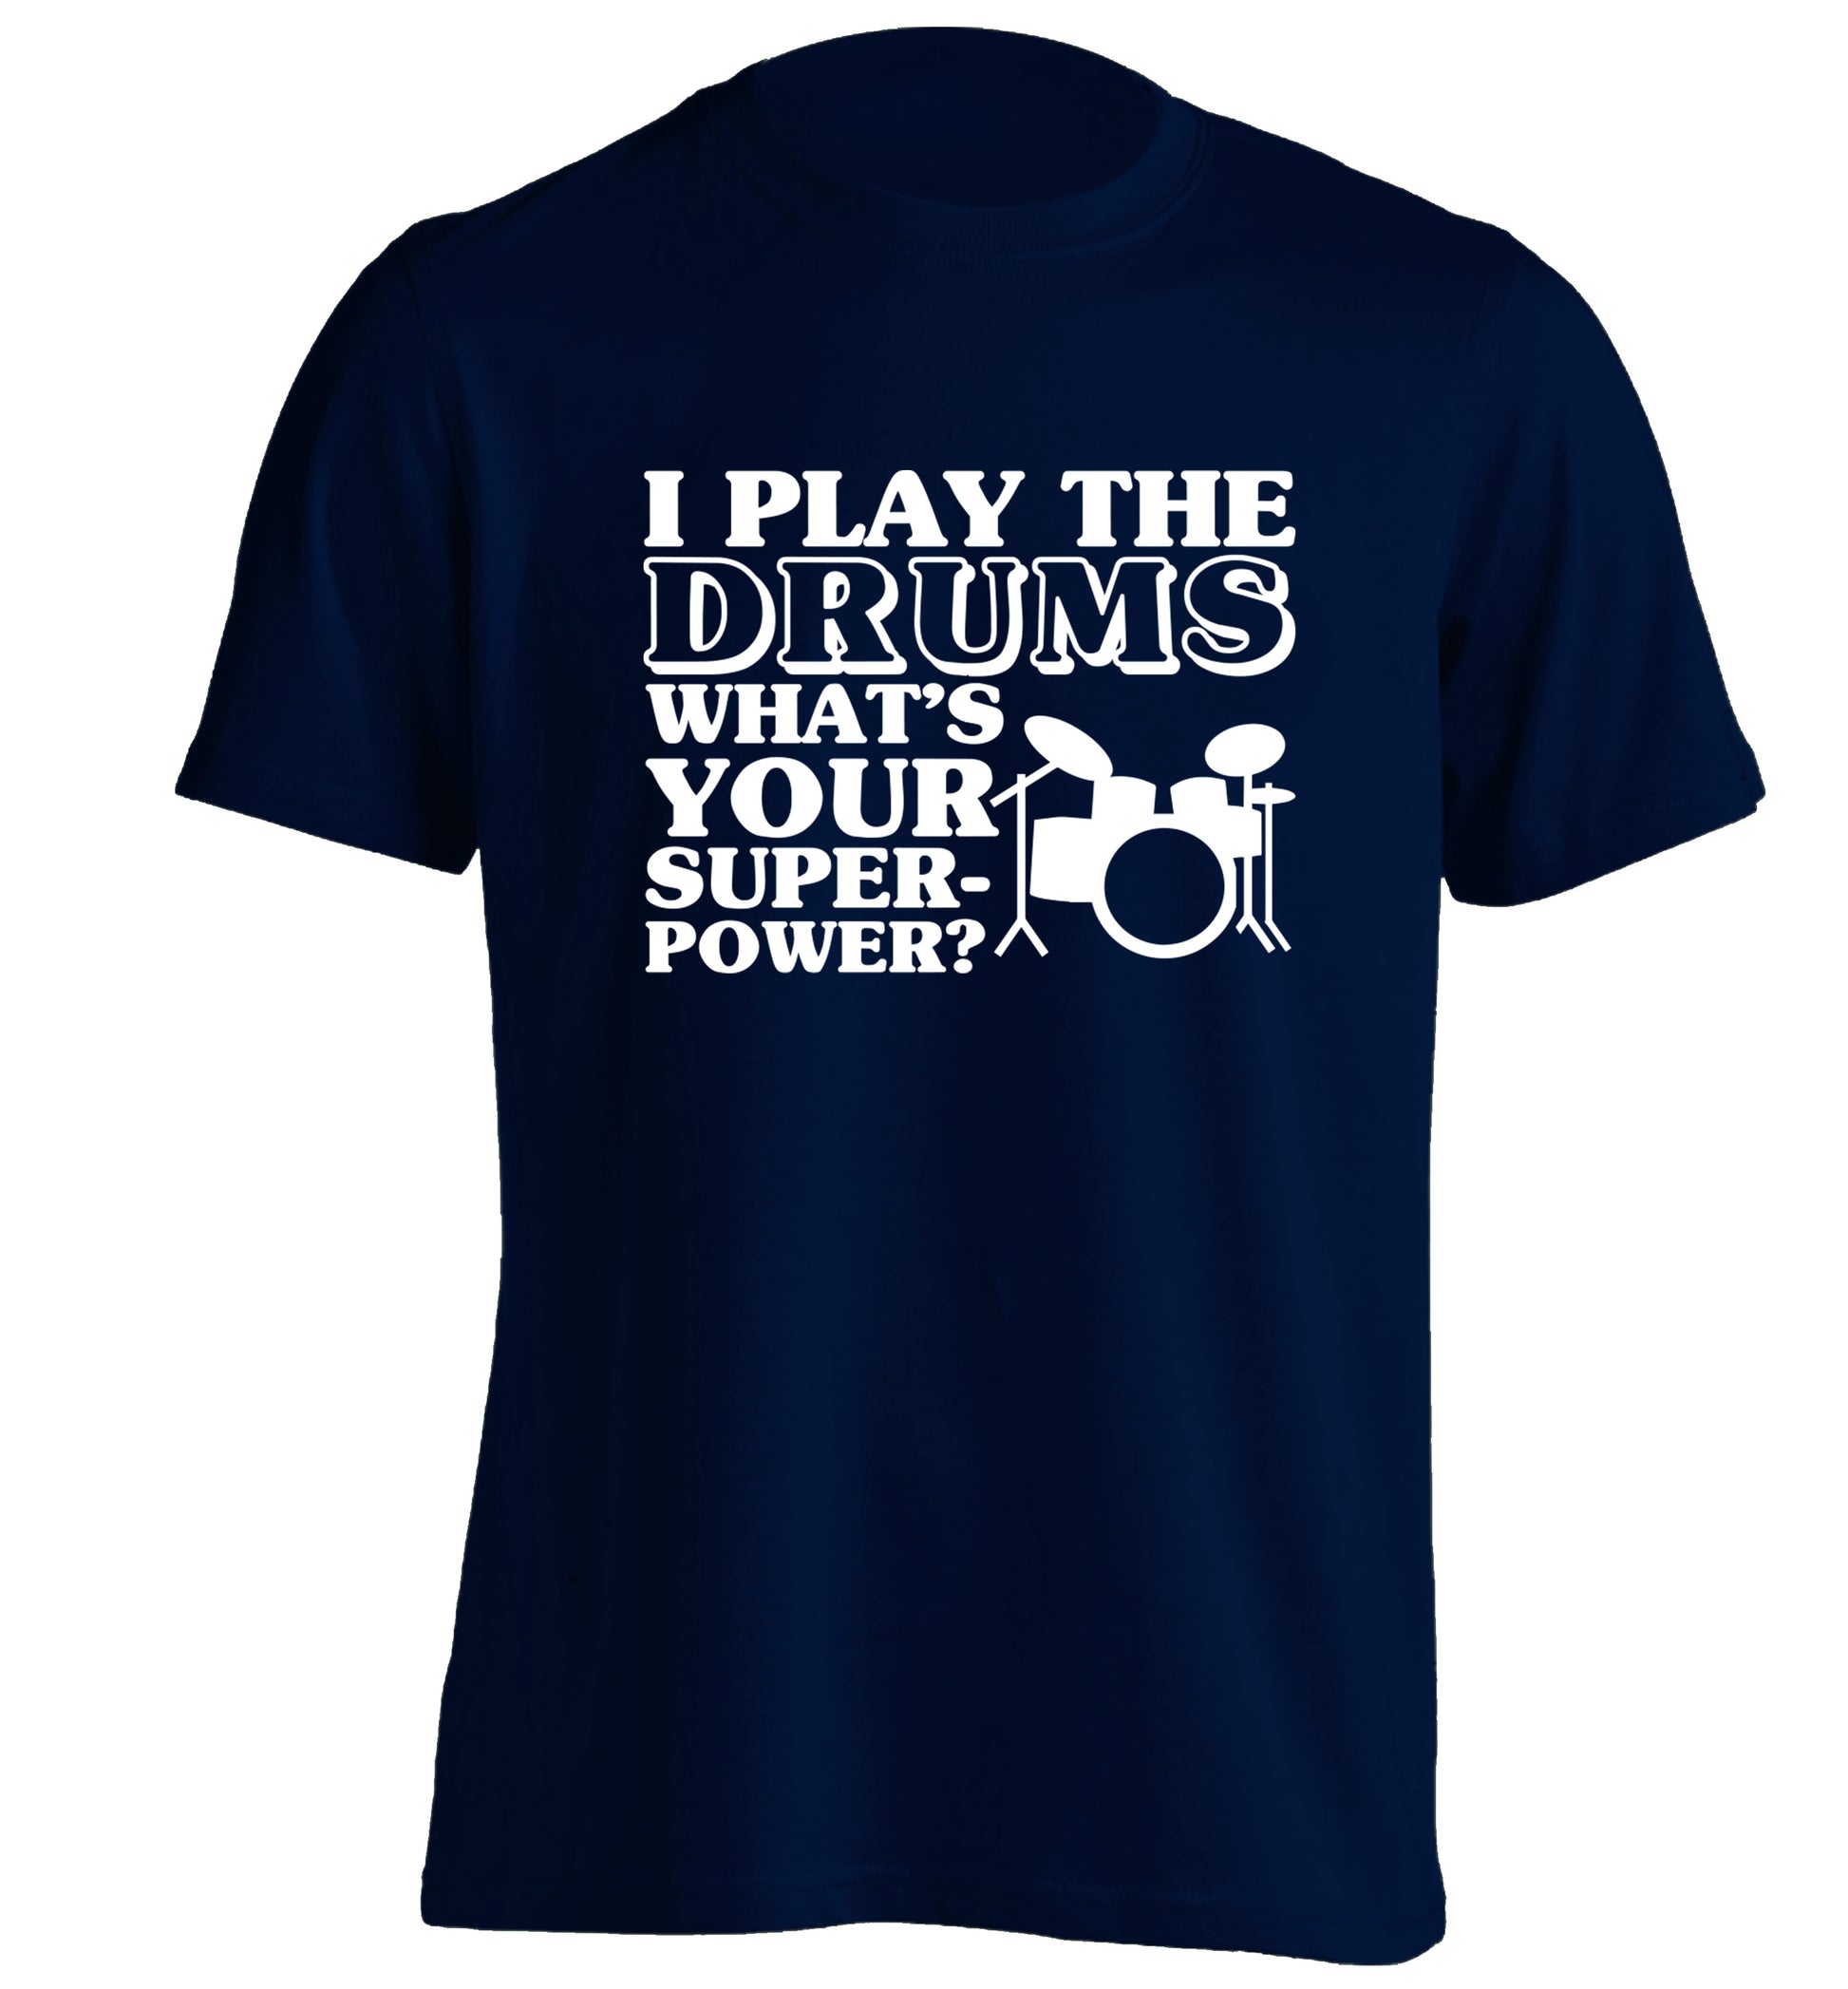 I play the drums what's your superpower? adults unisexnavy Tshirt 2XL